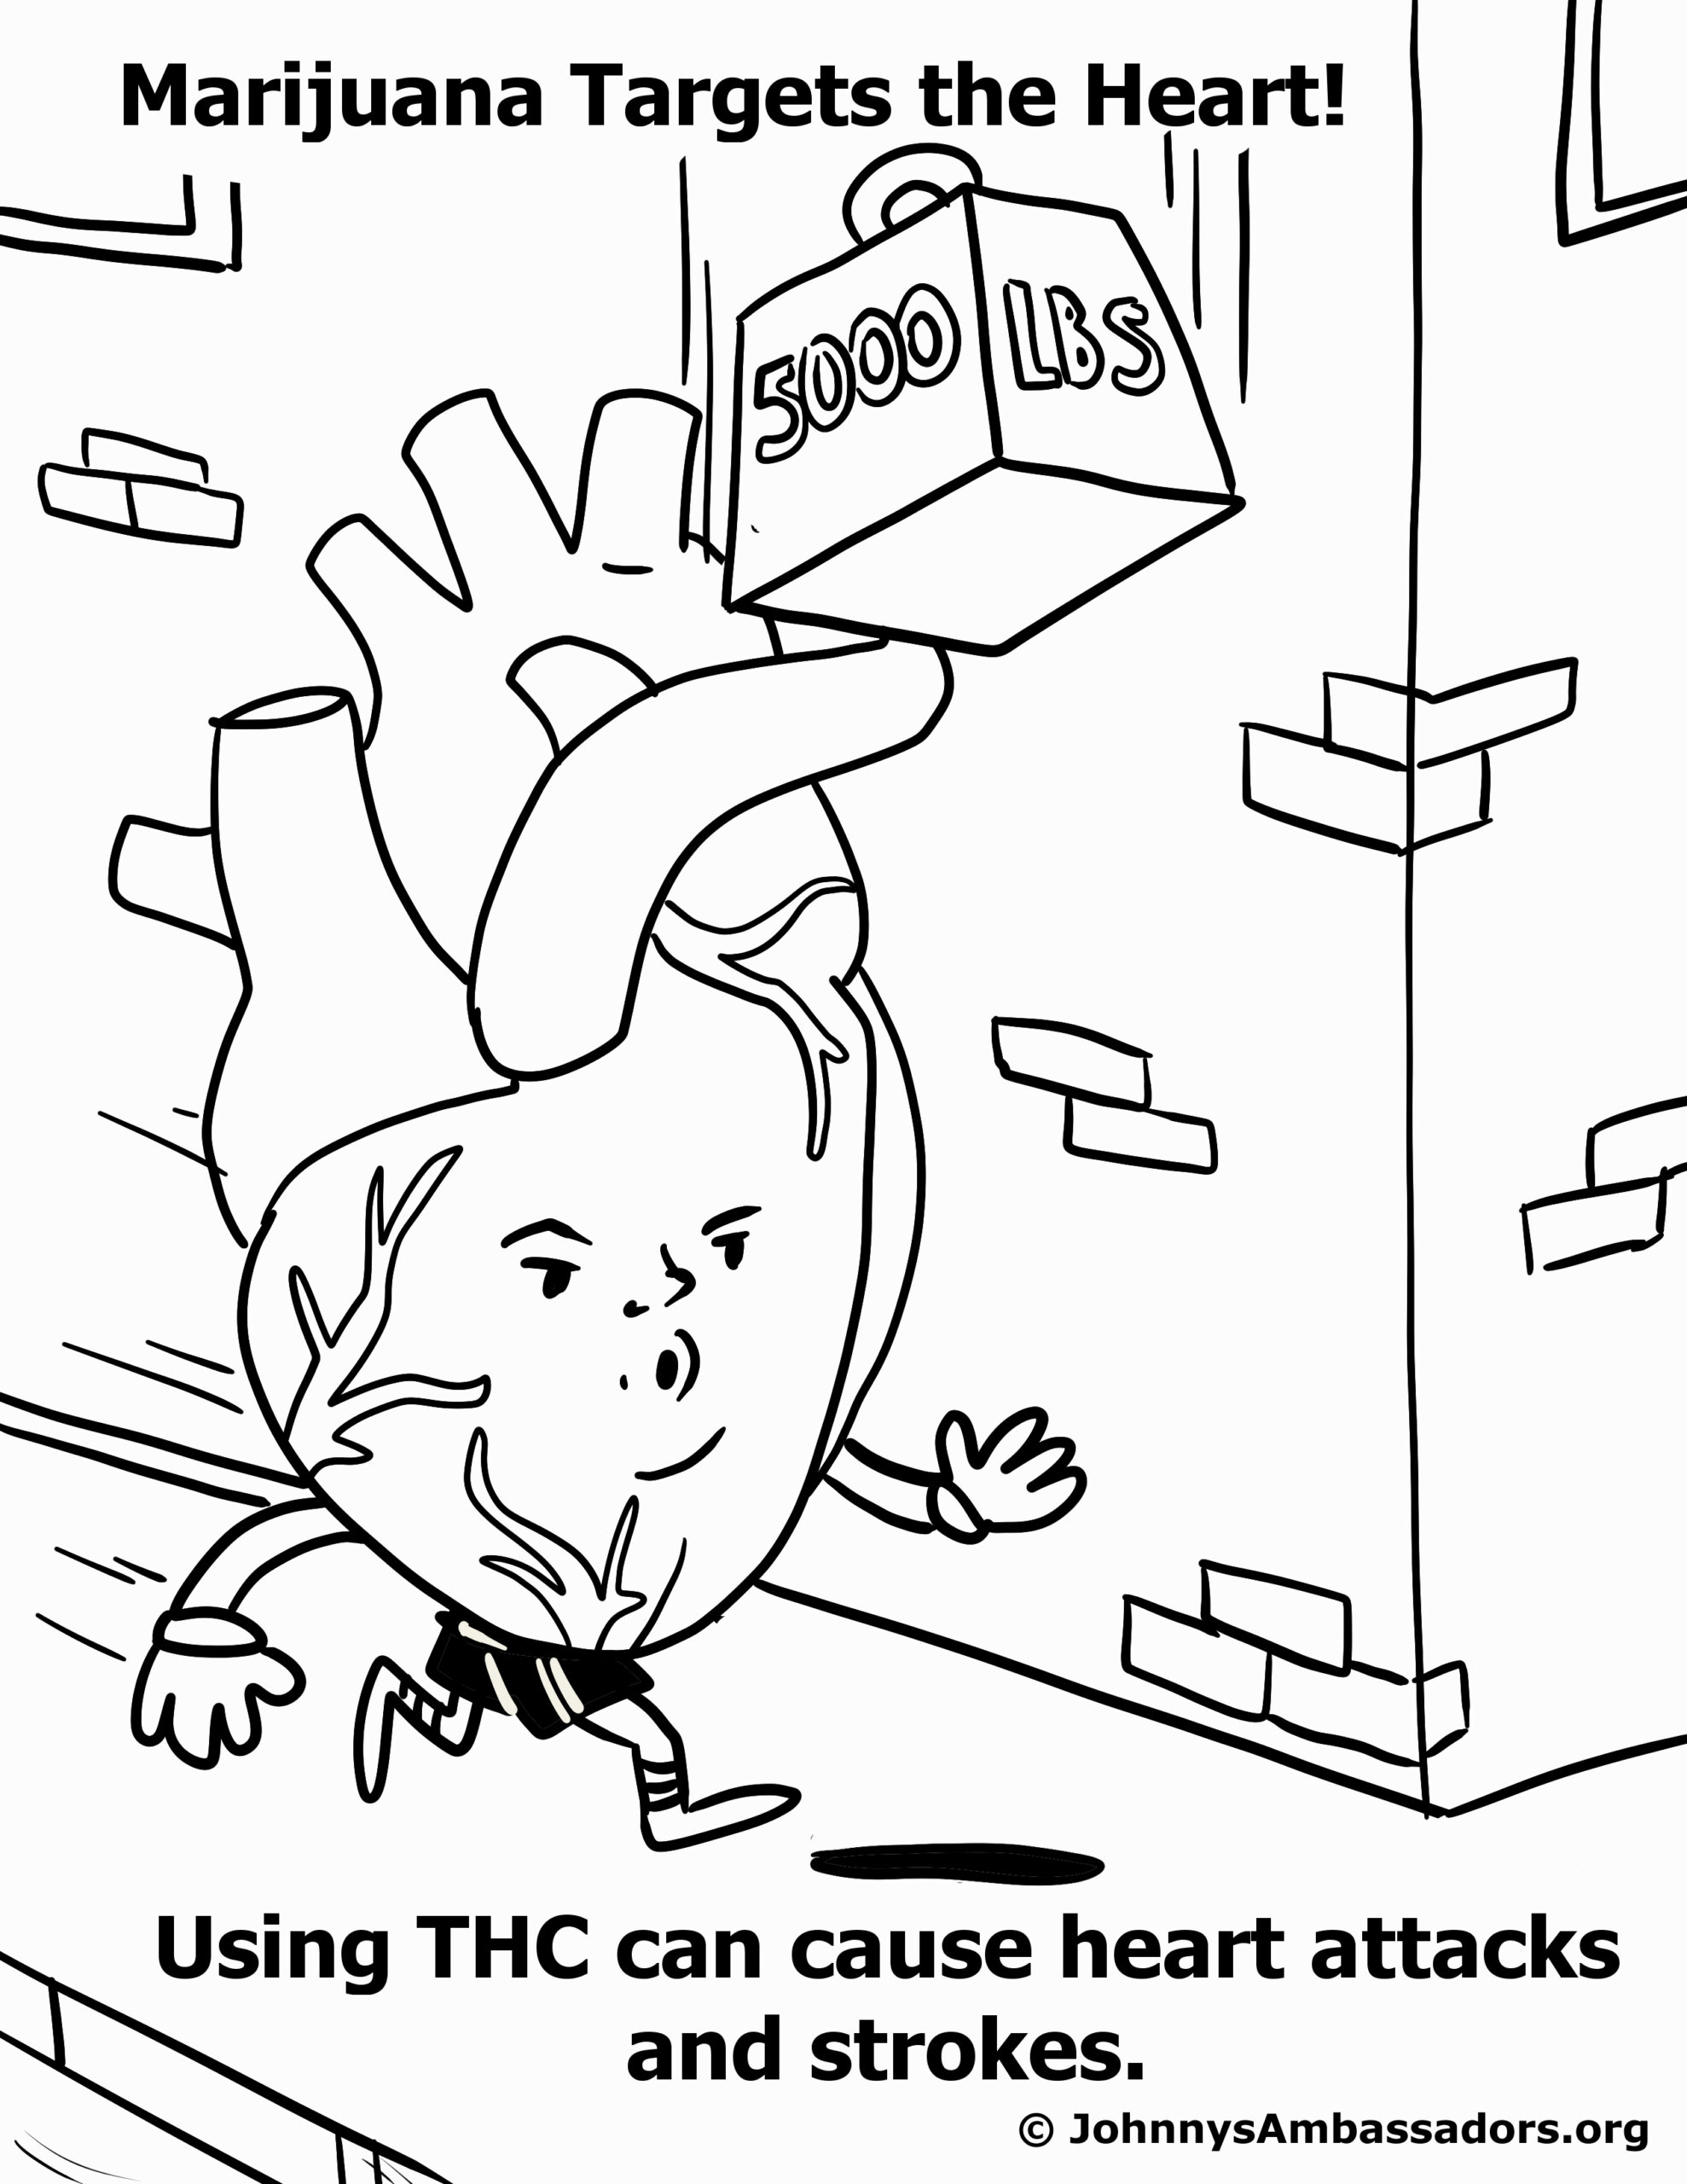 Elementary school coloring pages â johnnys ambassadors